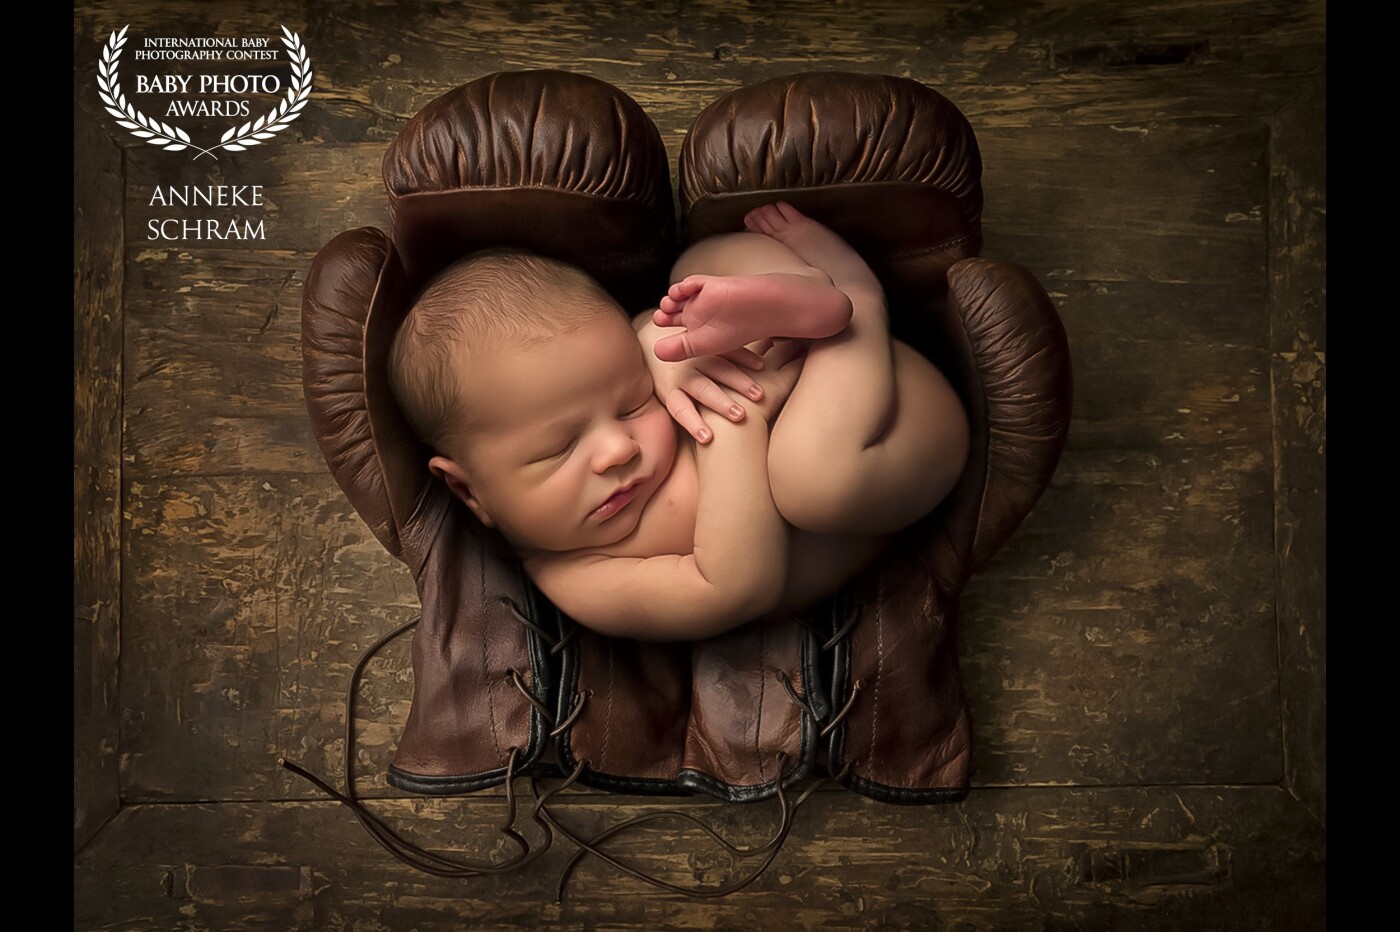 This is my sweet little nephew. He was lying on a dark brown blanket, with Dad's hands under the blanket holding him in the curled up pose. The rest is a composite with my old leather boxing gloves.